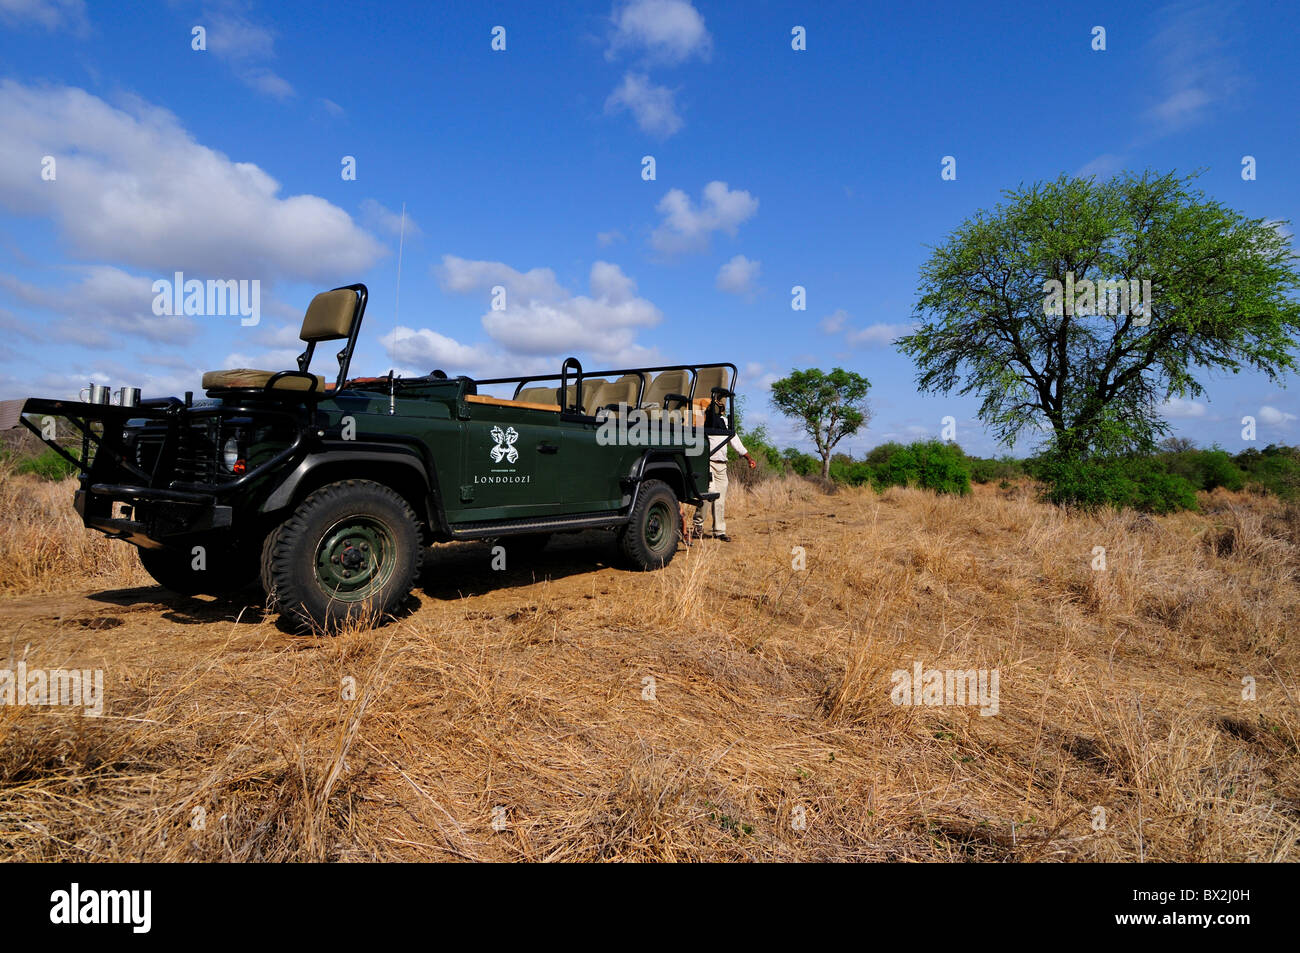 A safari jeep. Kruger National Park, South Africa. Stock Photo